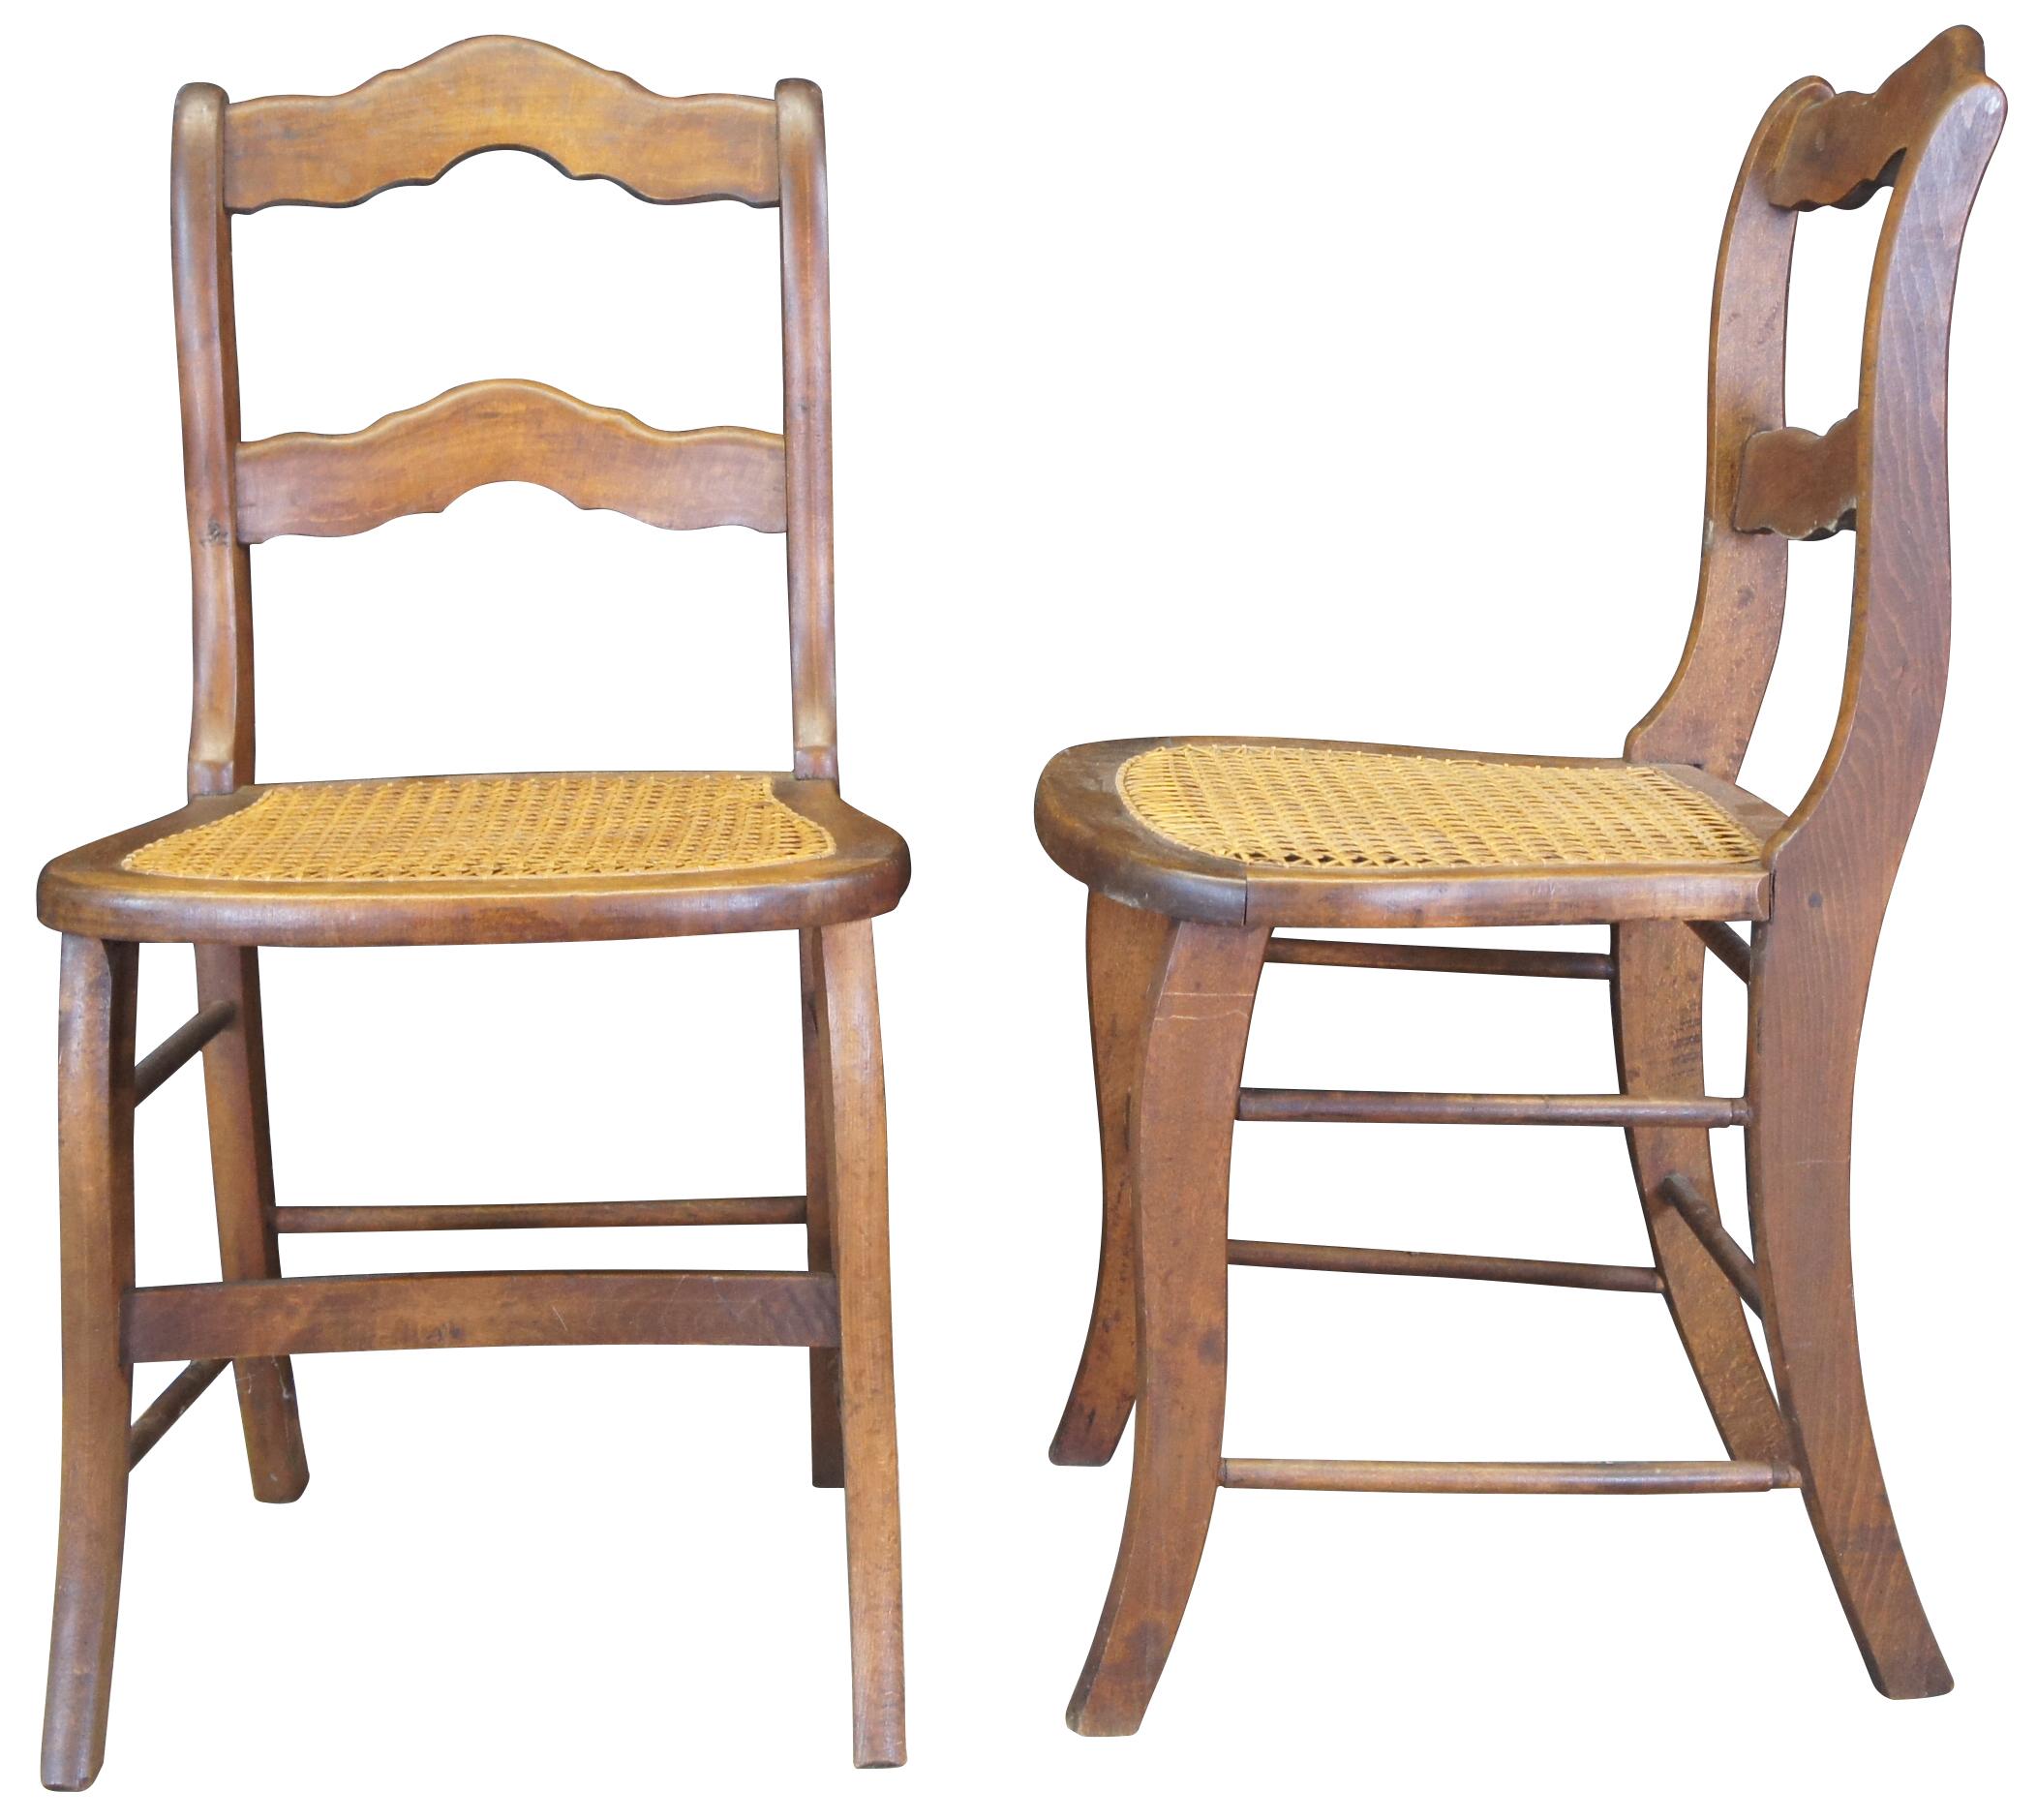 Set of 4 late Victorian side chairs. Made from oak with a contoured ladderback and cane seat. 

Measures: 20